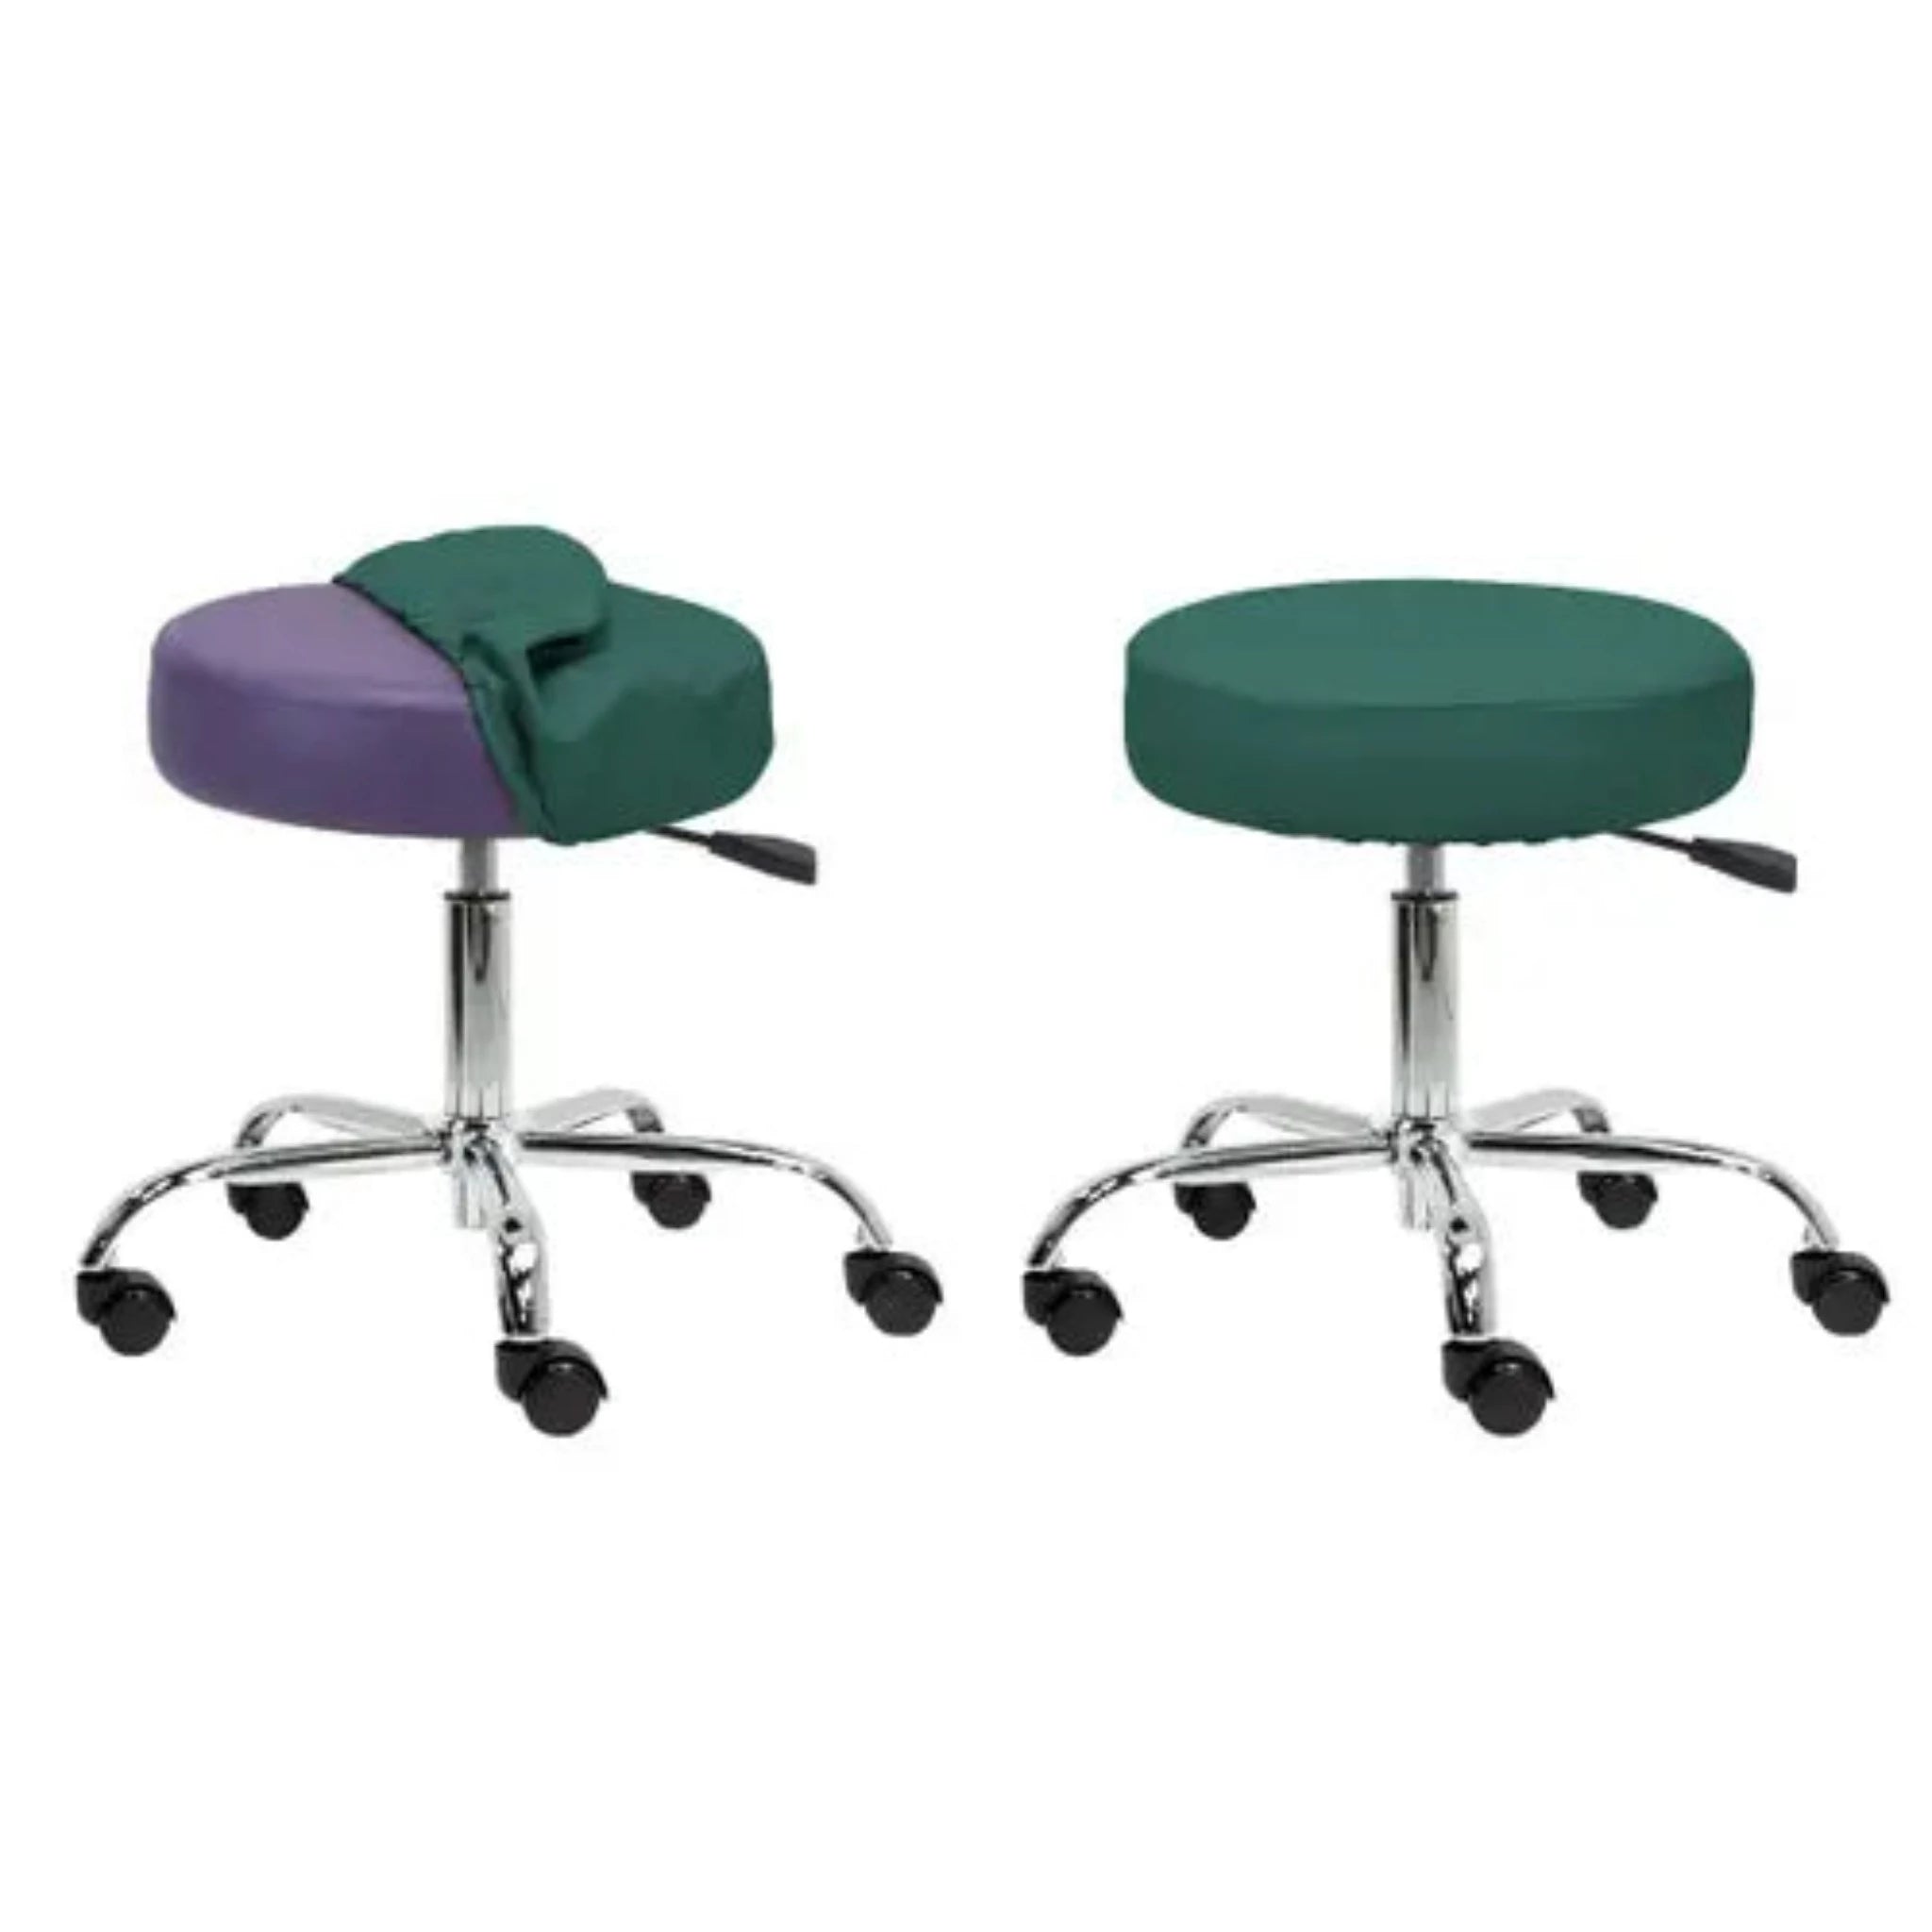 Stool Seat Cover EarthLite Rolling Stool